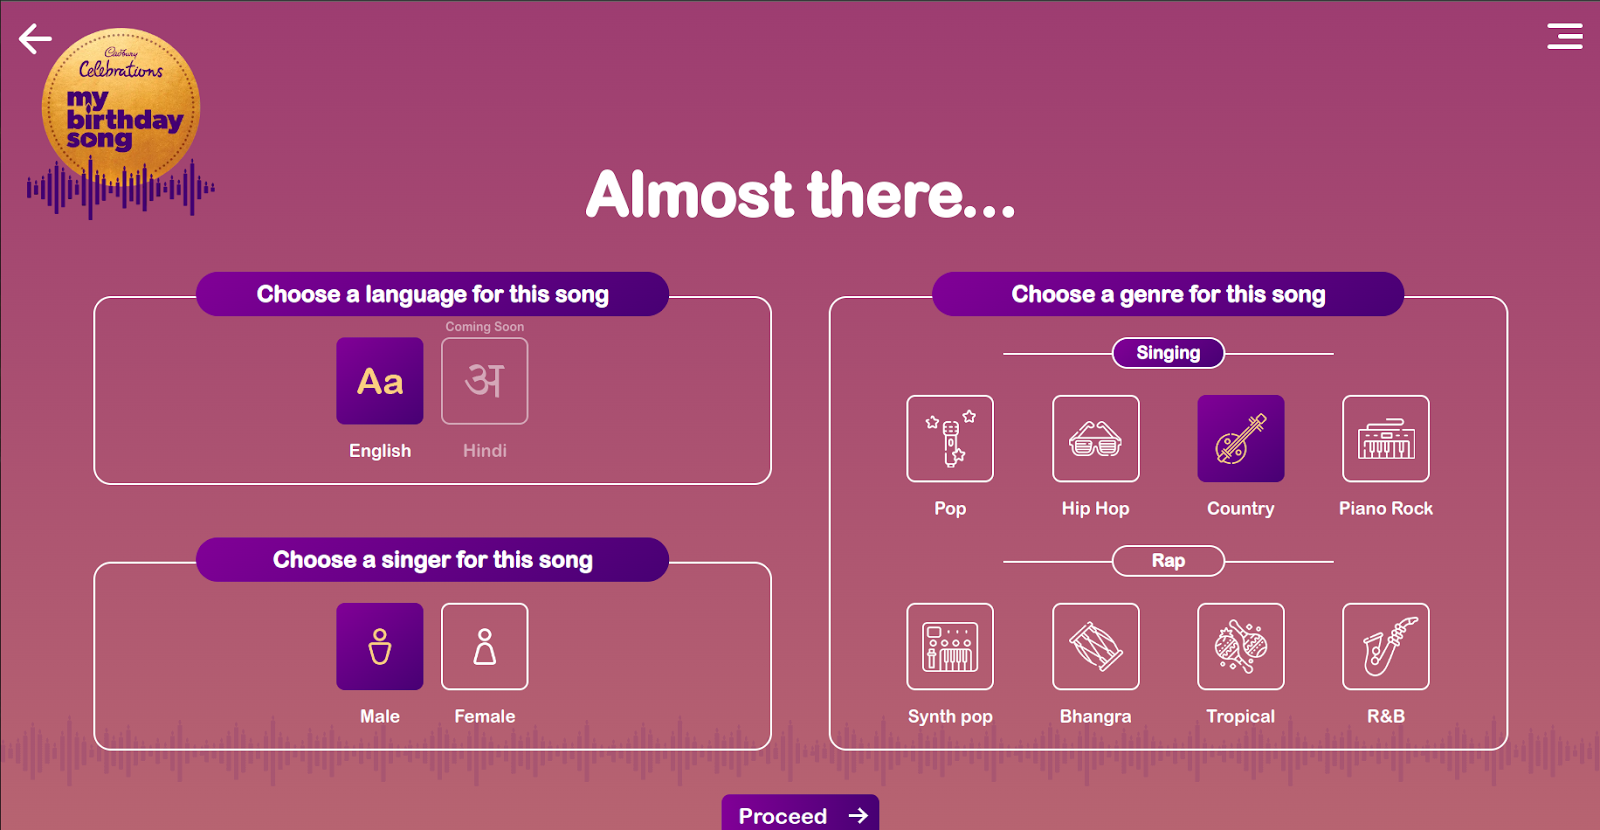 Choose the language, voice, and song genre preferences.